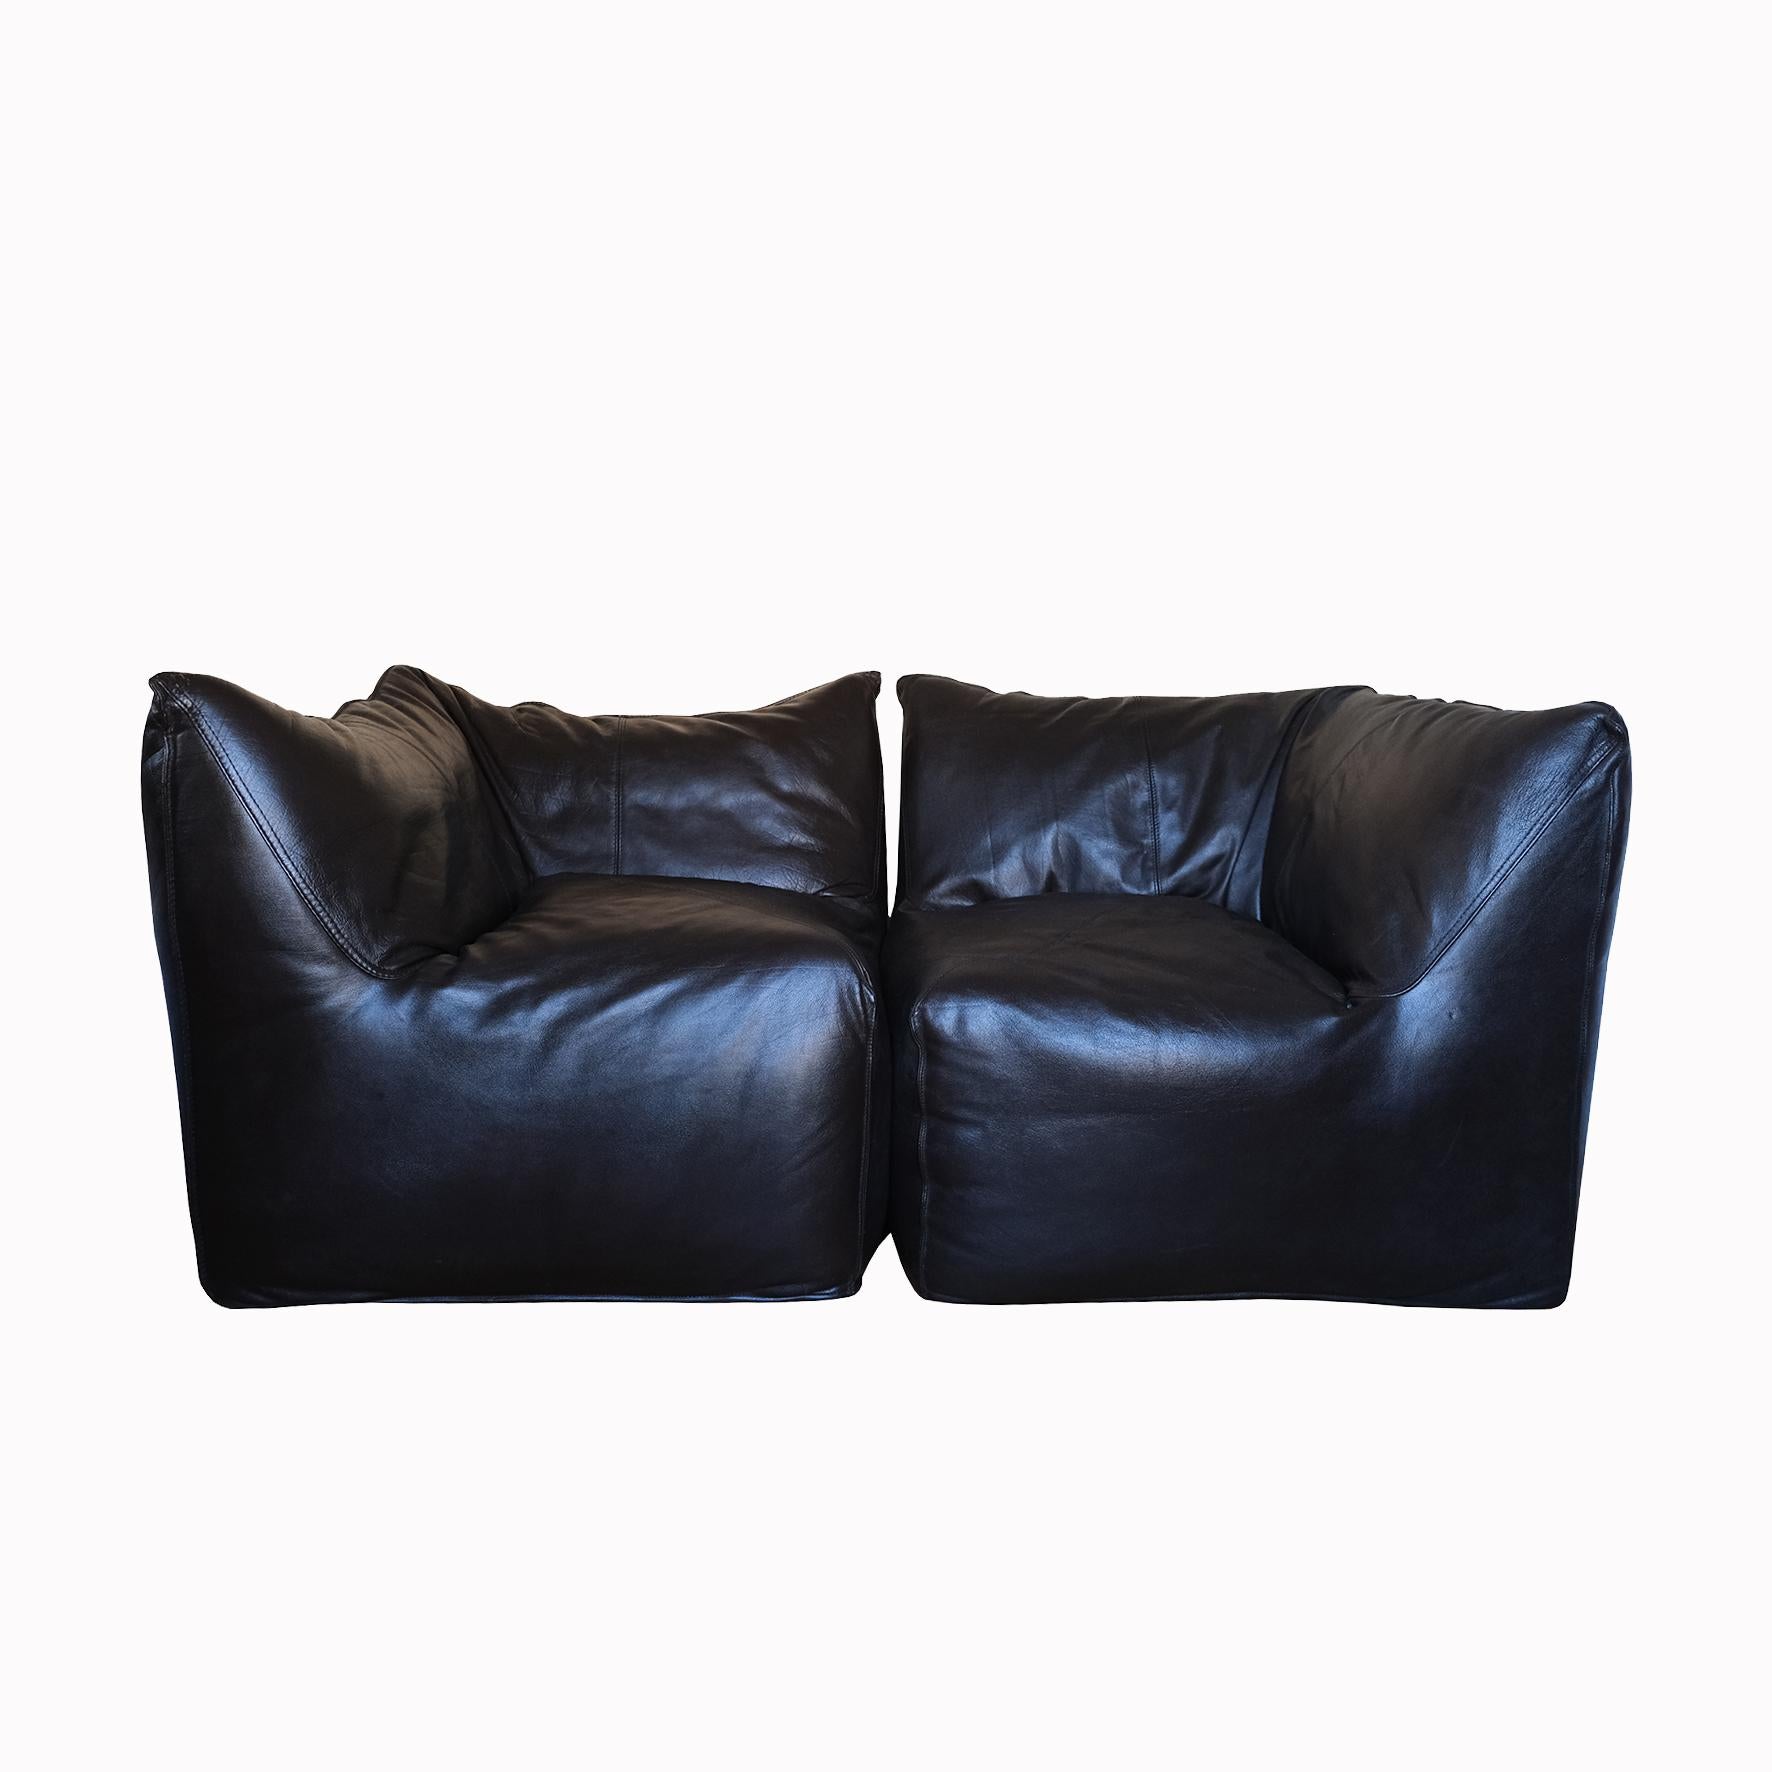 Mario Bellini

Le Bambole

Two armchairs combining to create a sofa, each upholstered with black leather, the internal foam supported with a metal structure. 
Produced by C&B Italia.
Marked underneath.
Circa 1972. Italy.

Literature
Domus,